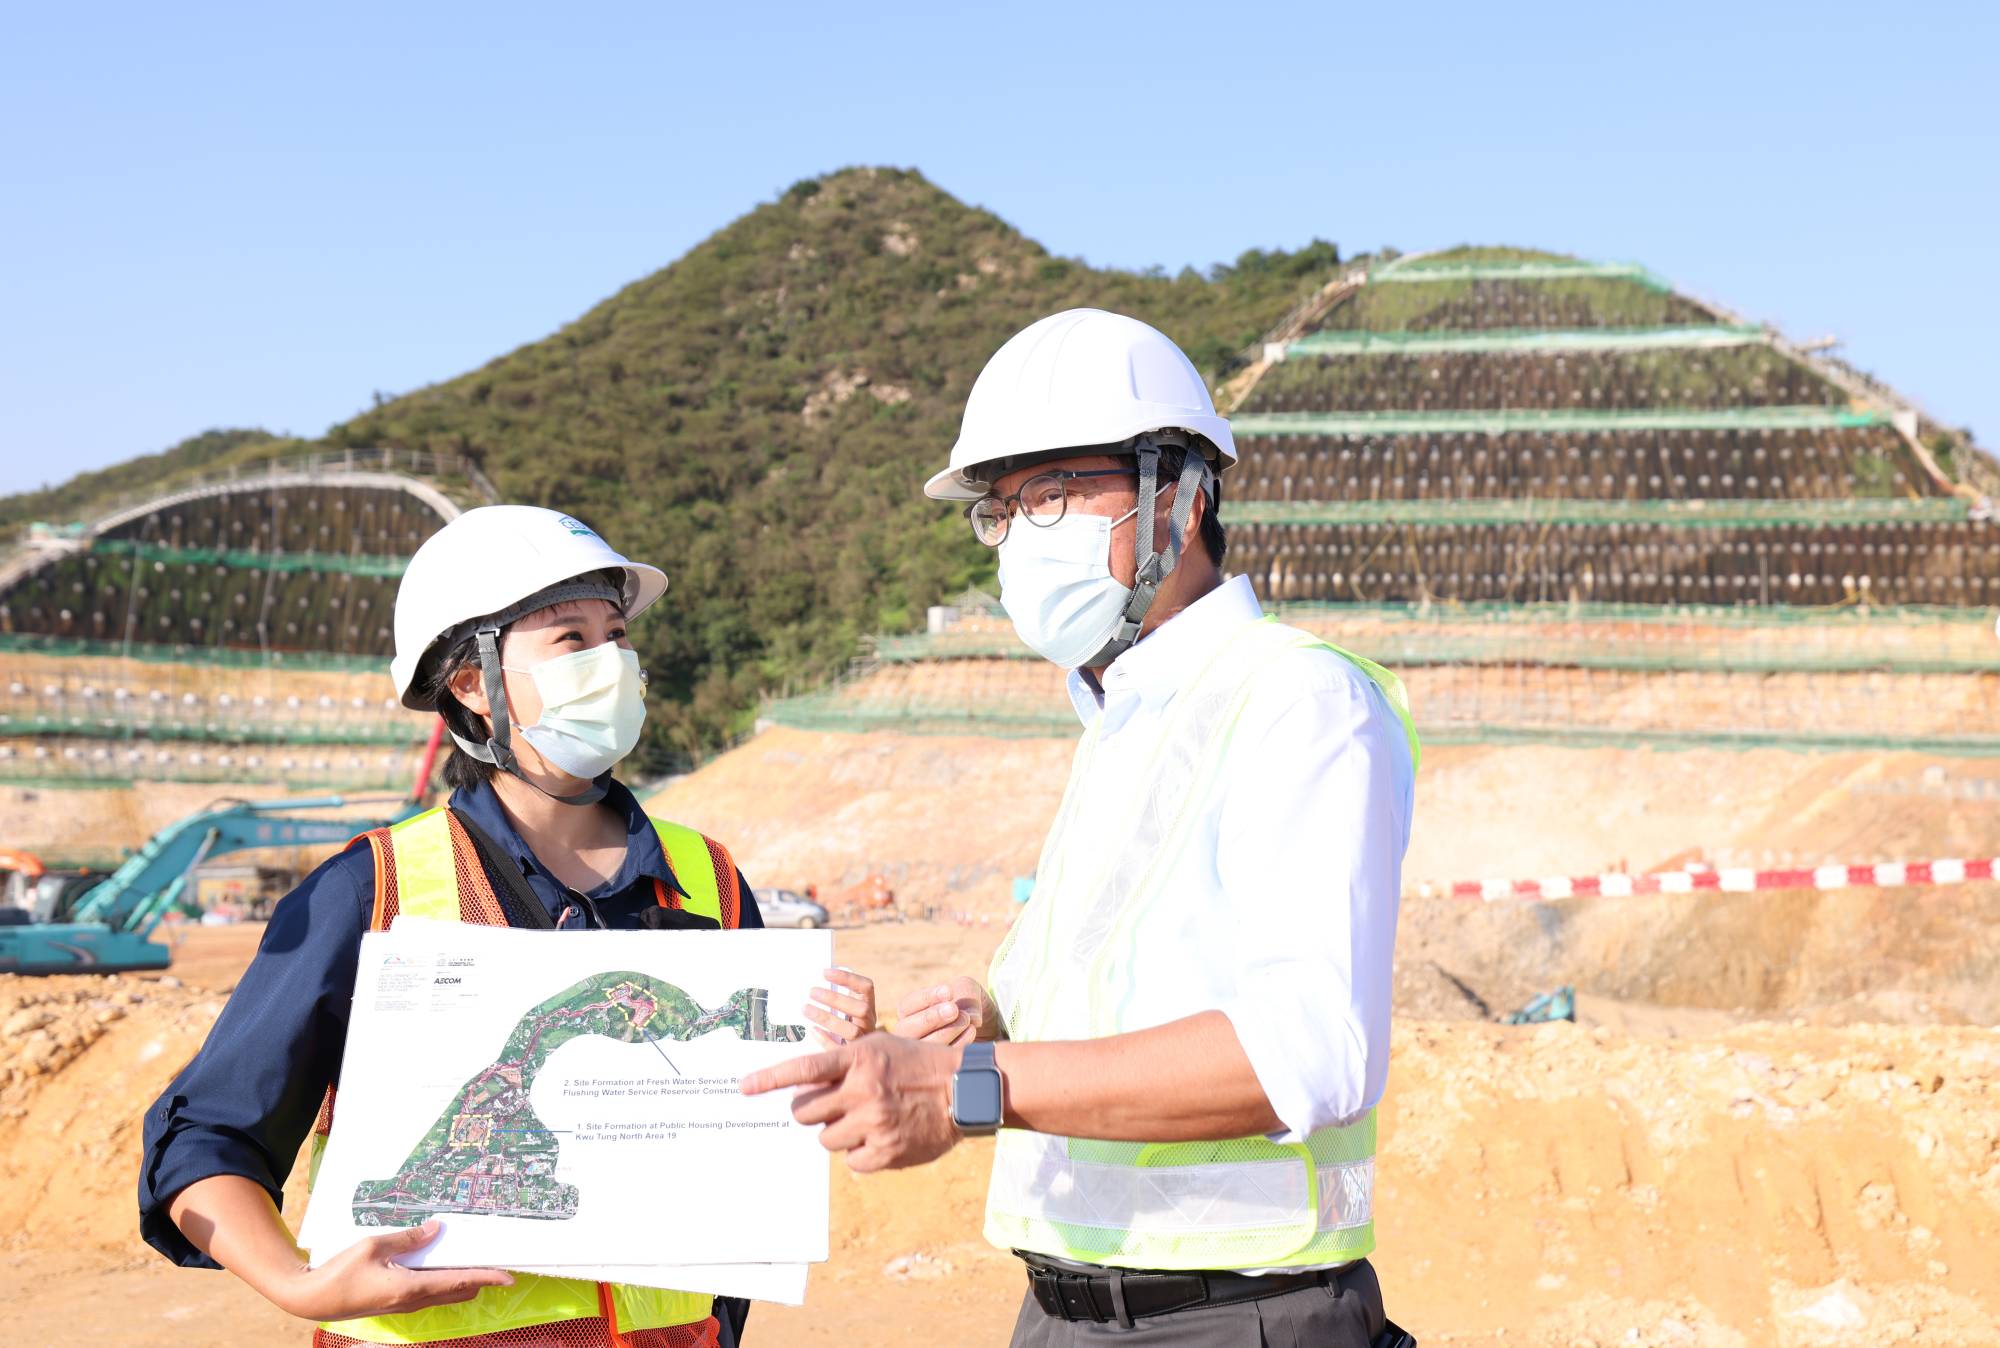 The SDEV, Mr Michael WONG (right), is briefed by Engineer of the North Development Office of the CEDD, Miss CHAN Hiu-tung, Winnie (left), on the latest update on the construction of two large-scale service reservoirs in the KTN NDA.